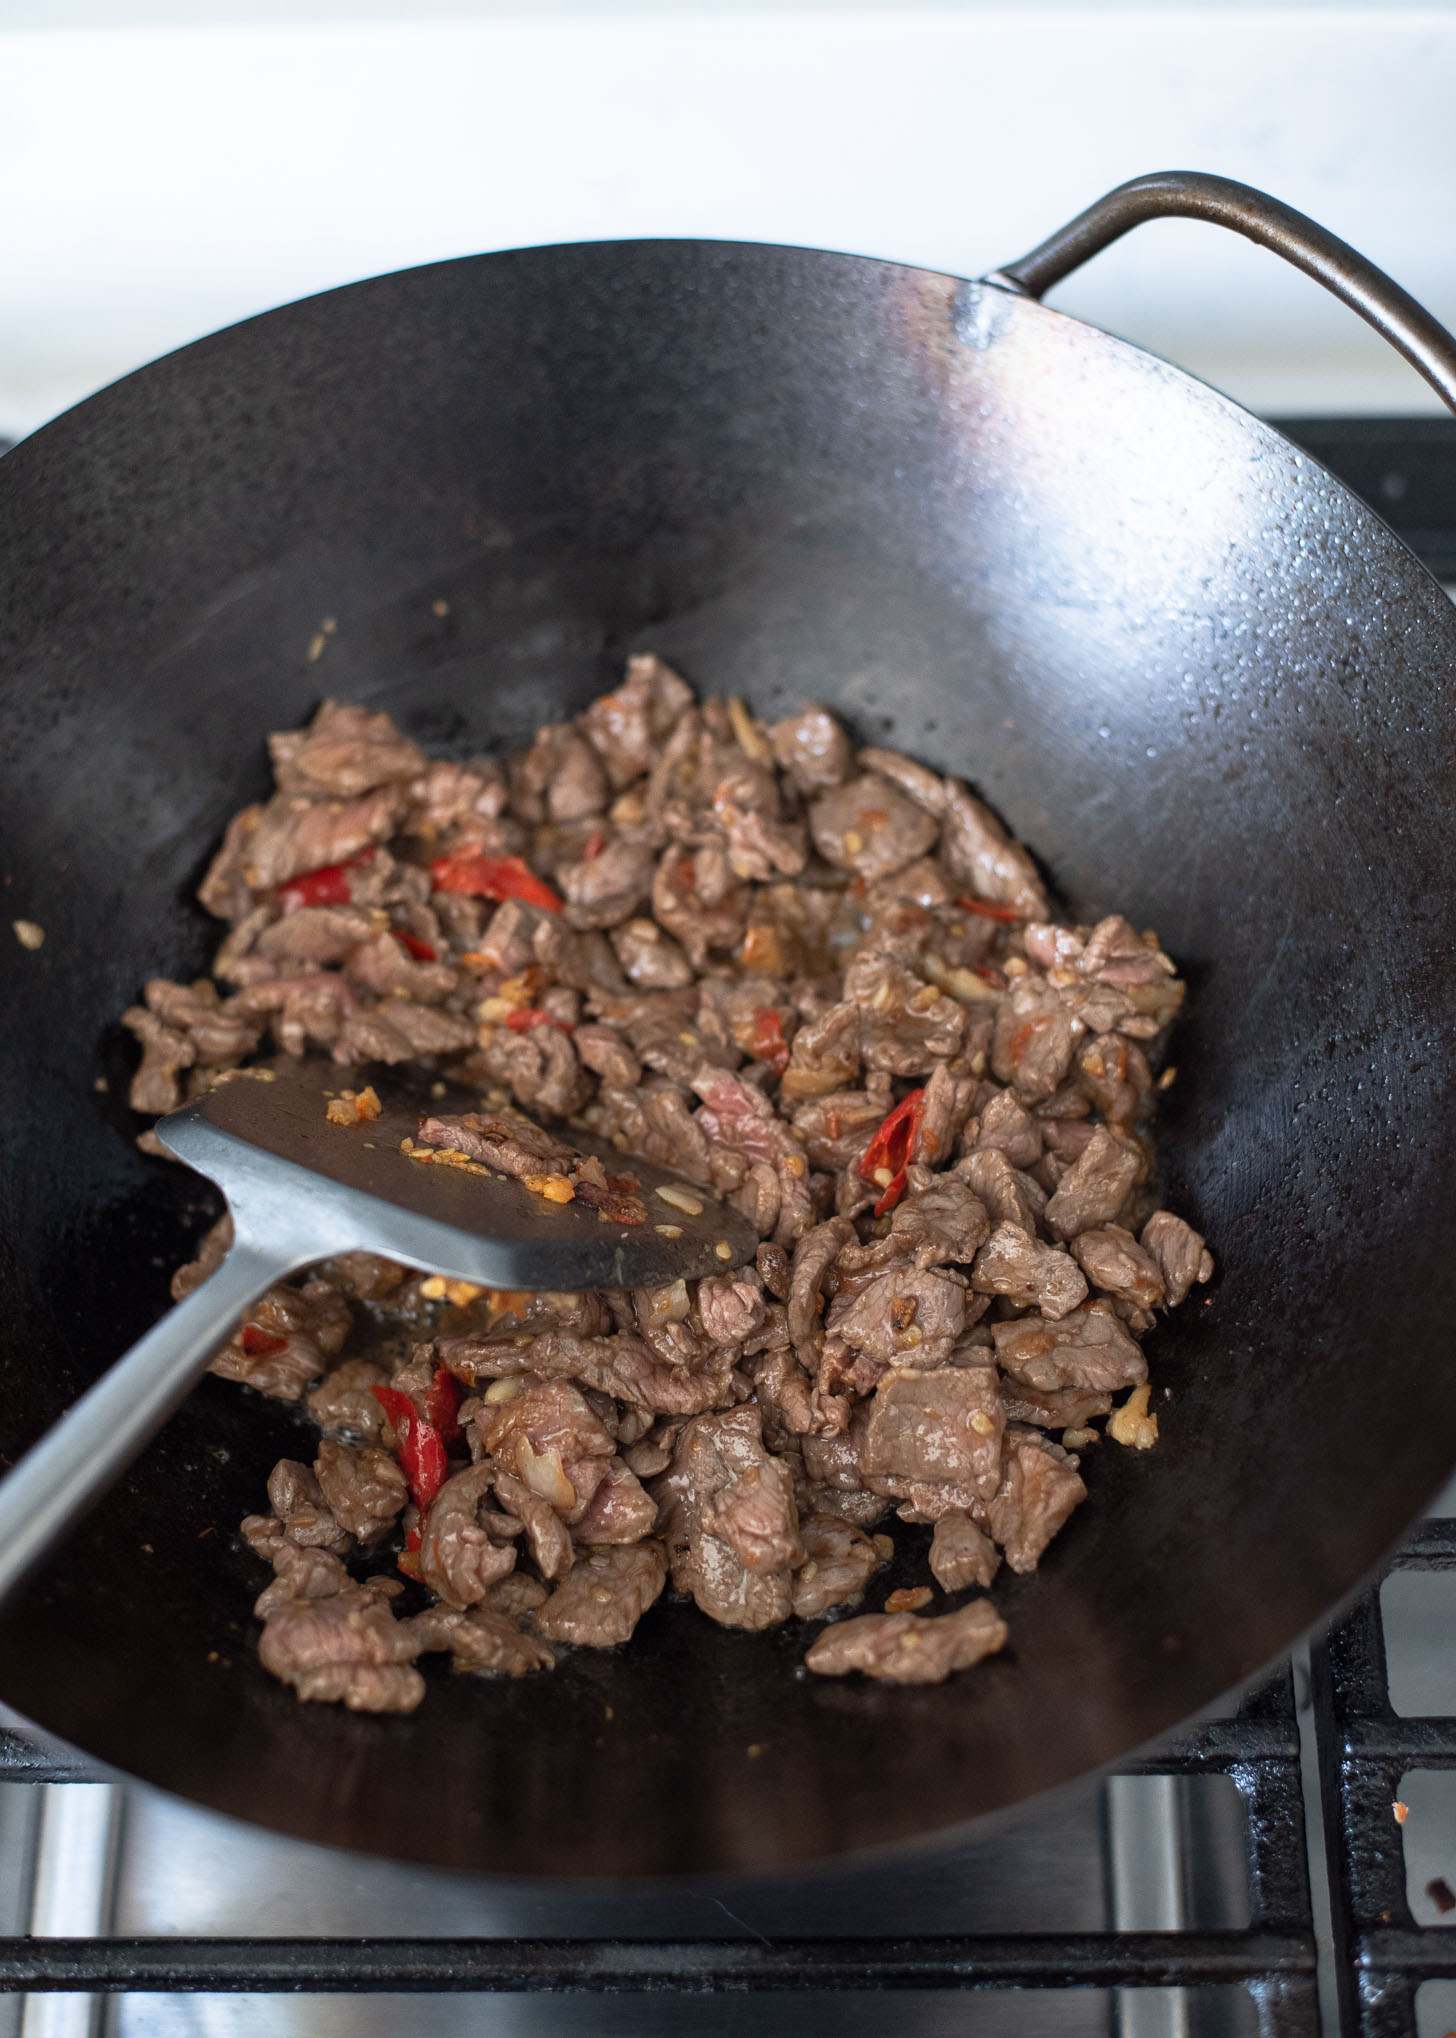 Beef pieces are added to wok to make Thai basil beef stir-fry.